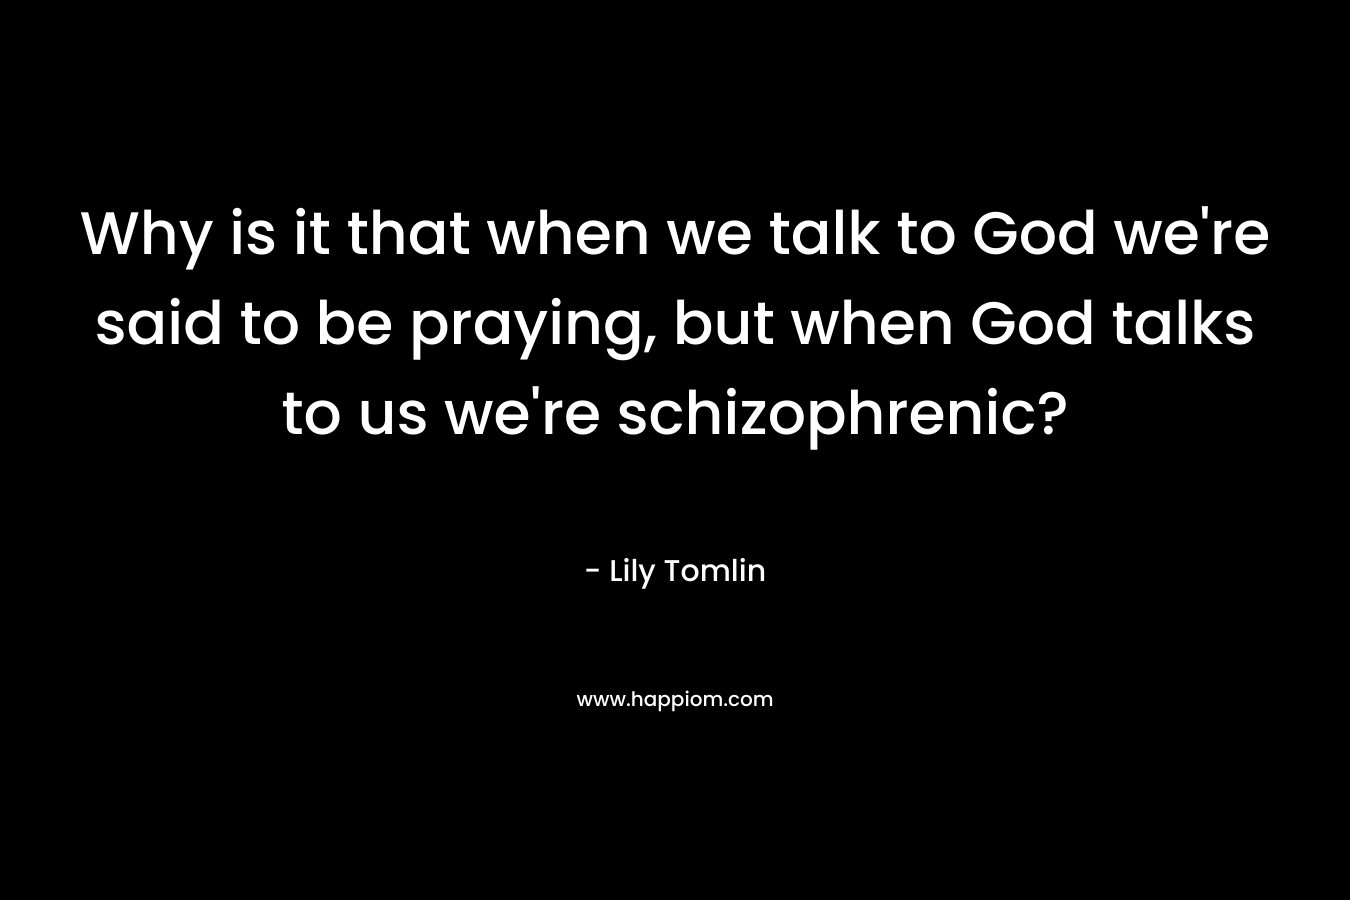 Why is it that when we talk to God we’re said to be praying, but when God talks to us we’re schizophrenic? – Lily Tomlin